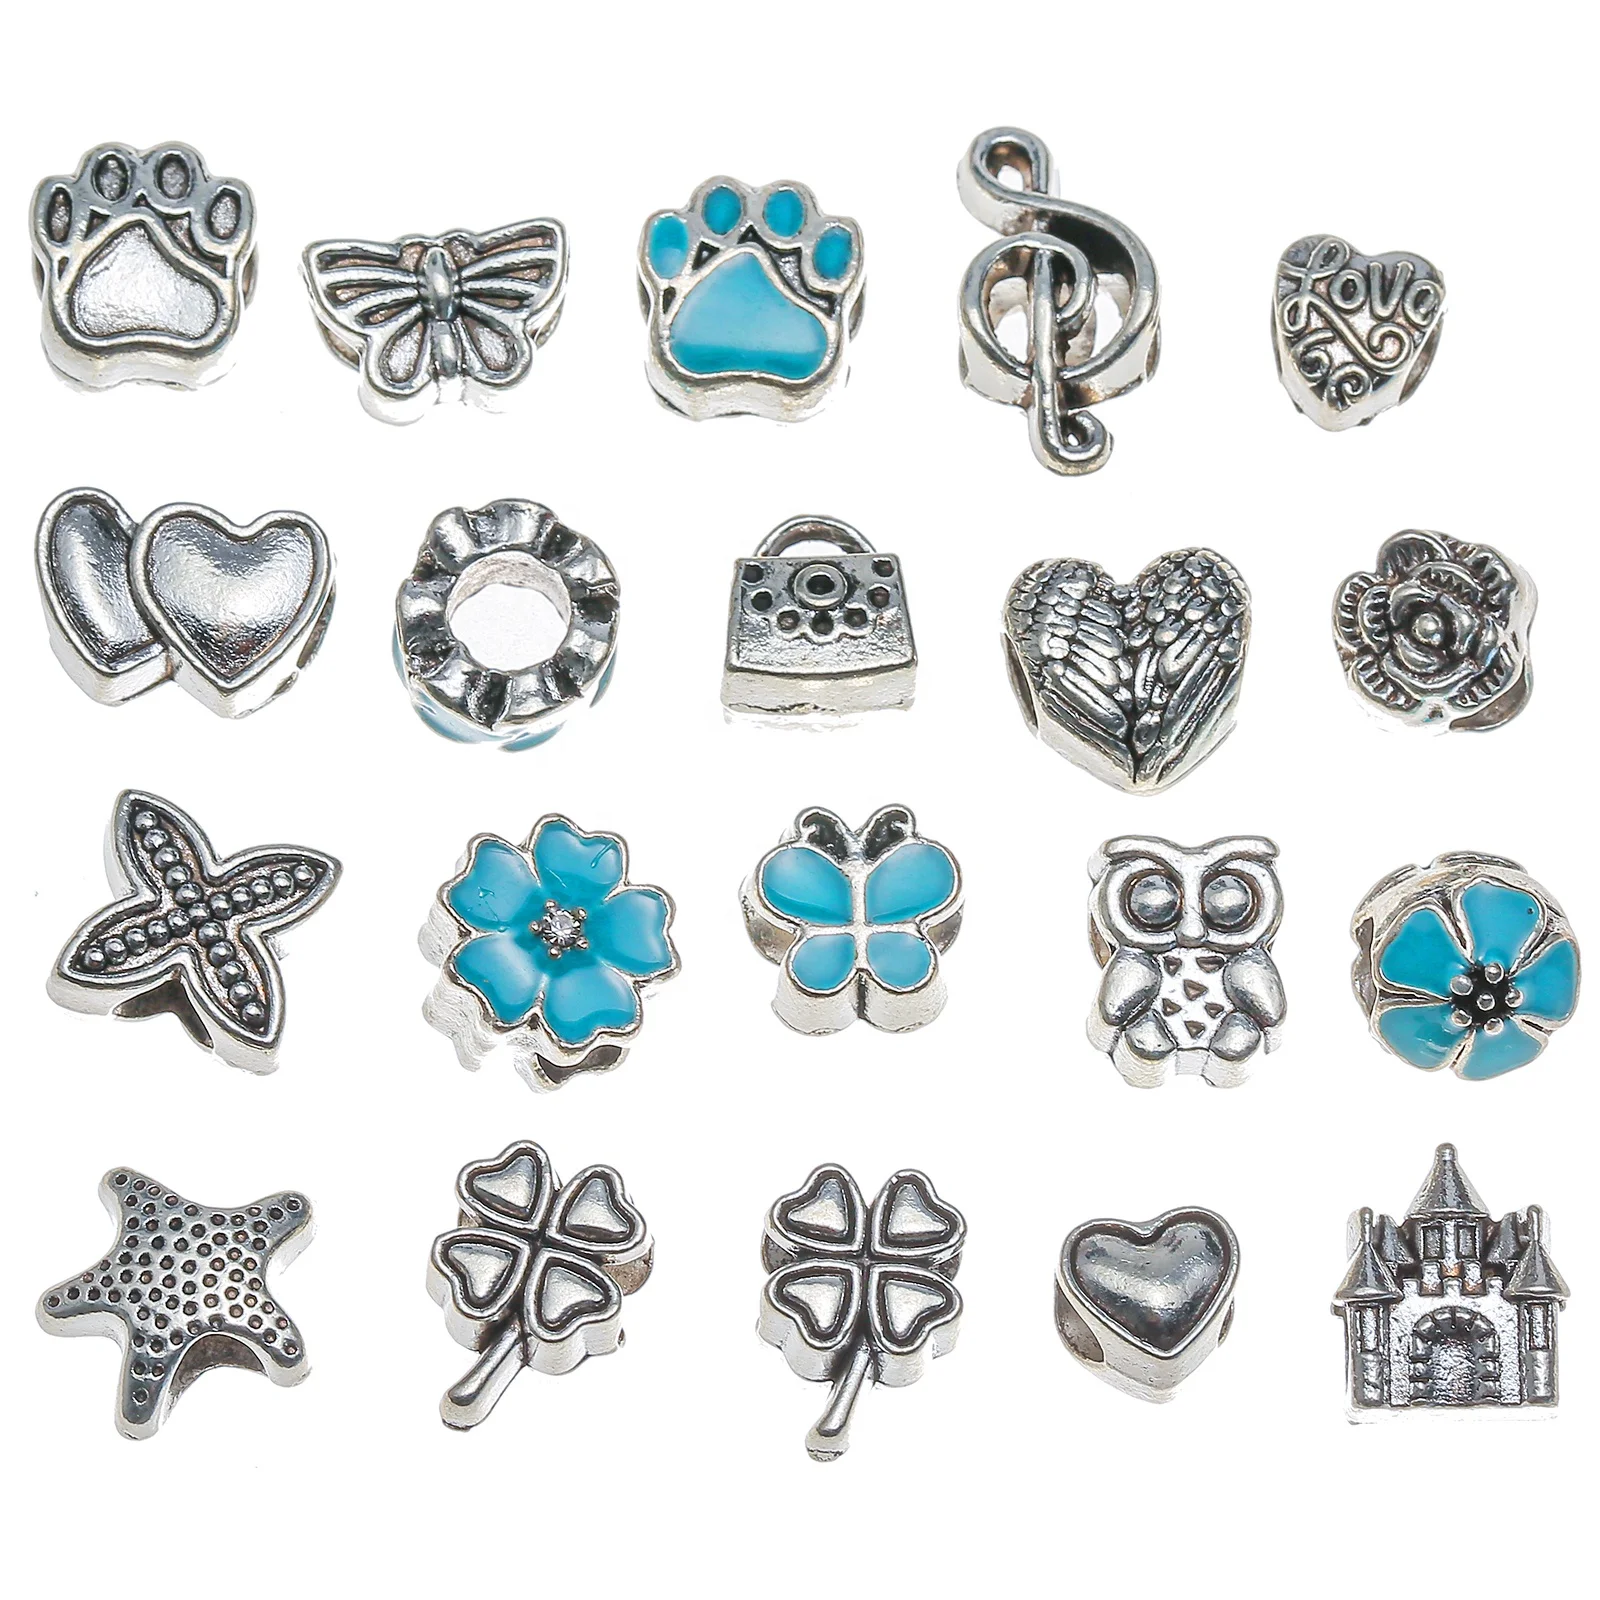 

New Antique Silver Plated Big hole Alloy beads enamel Flower butterfly Beads Charms DIY Pendant for jewelry making Accessories, As shown